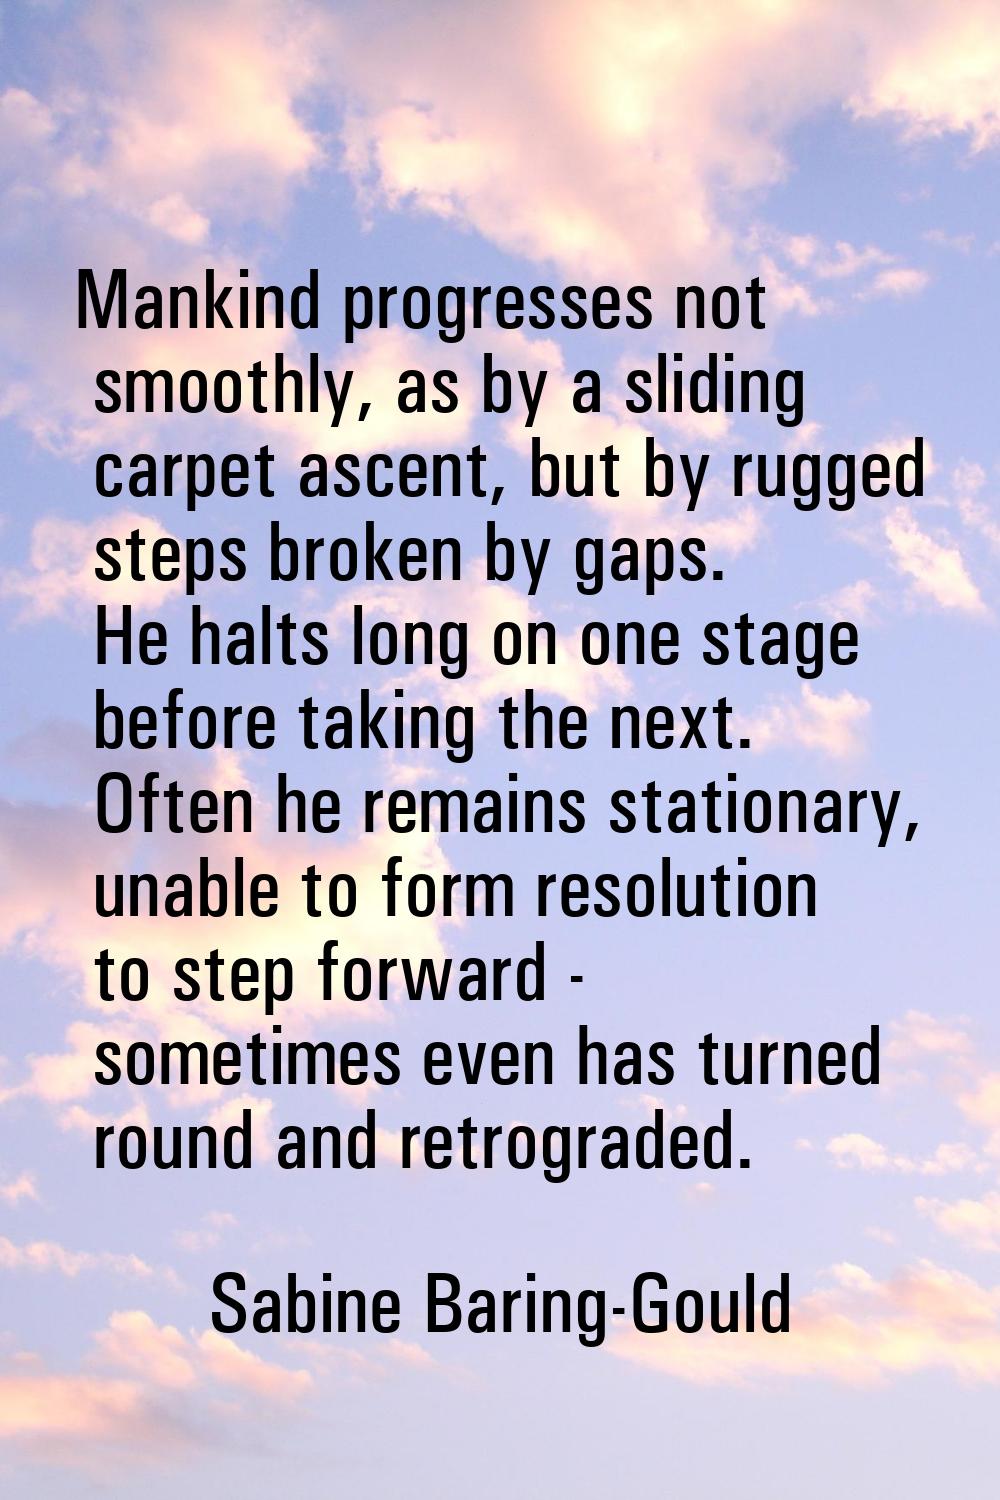 Mankind progresses not smoothly, as by a sliding carpet ascent, but by rugged steps broken by gaps.